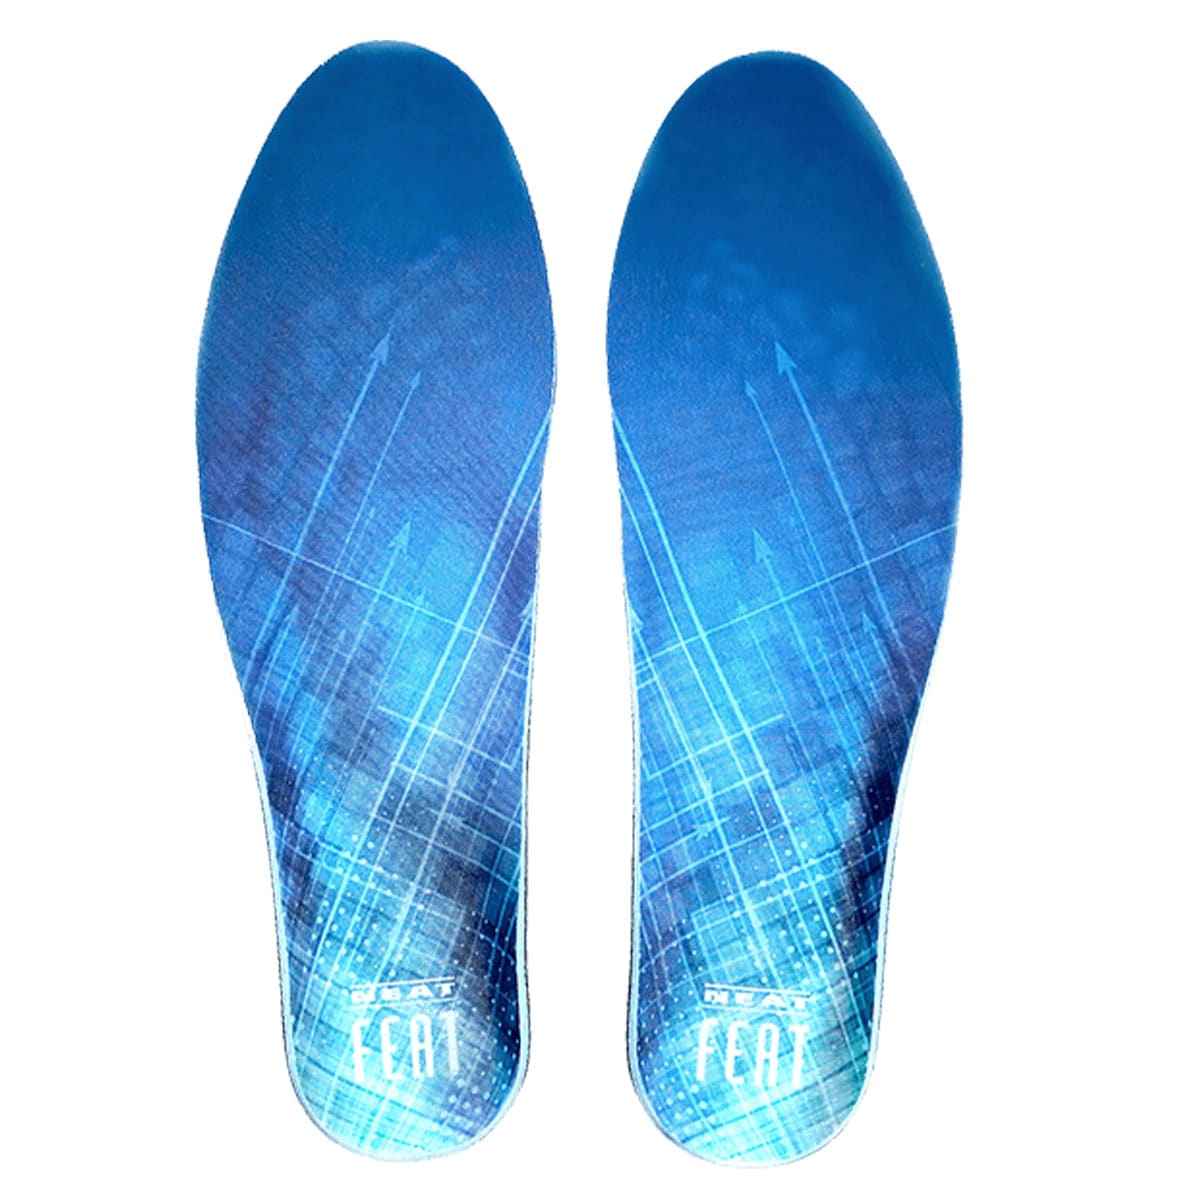 Neat Feat Advanced Memory Foam Insole that Self-Forms Men 1 Pair